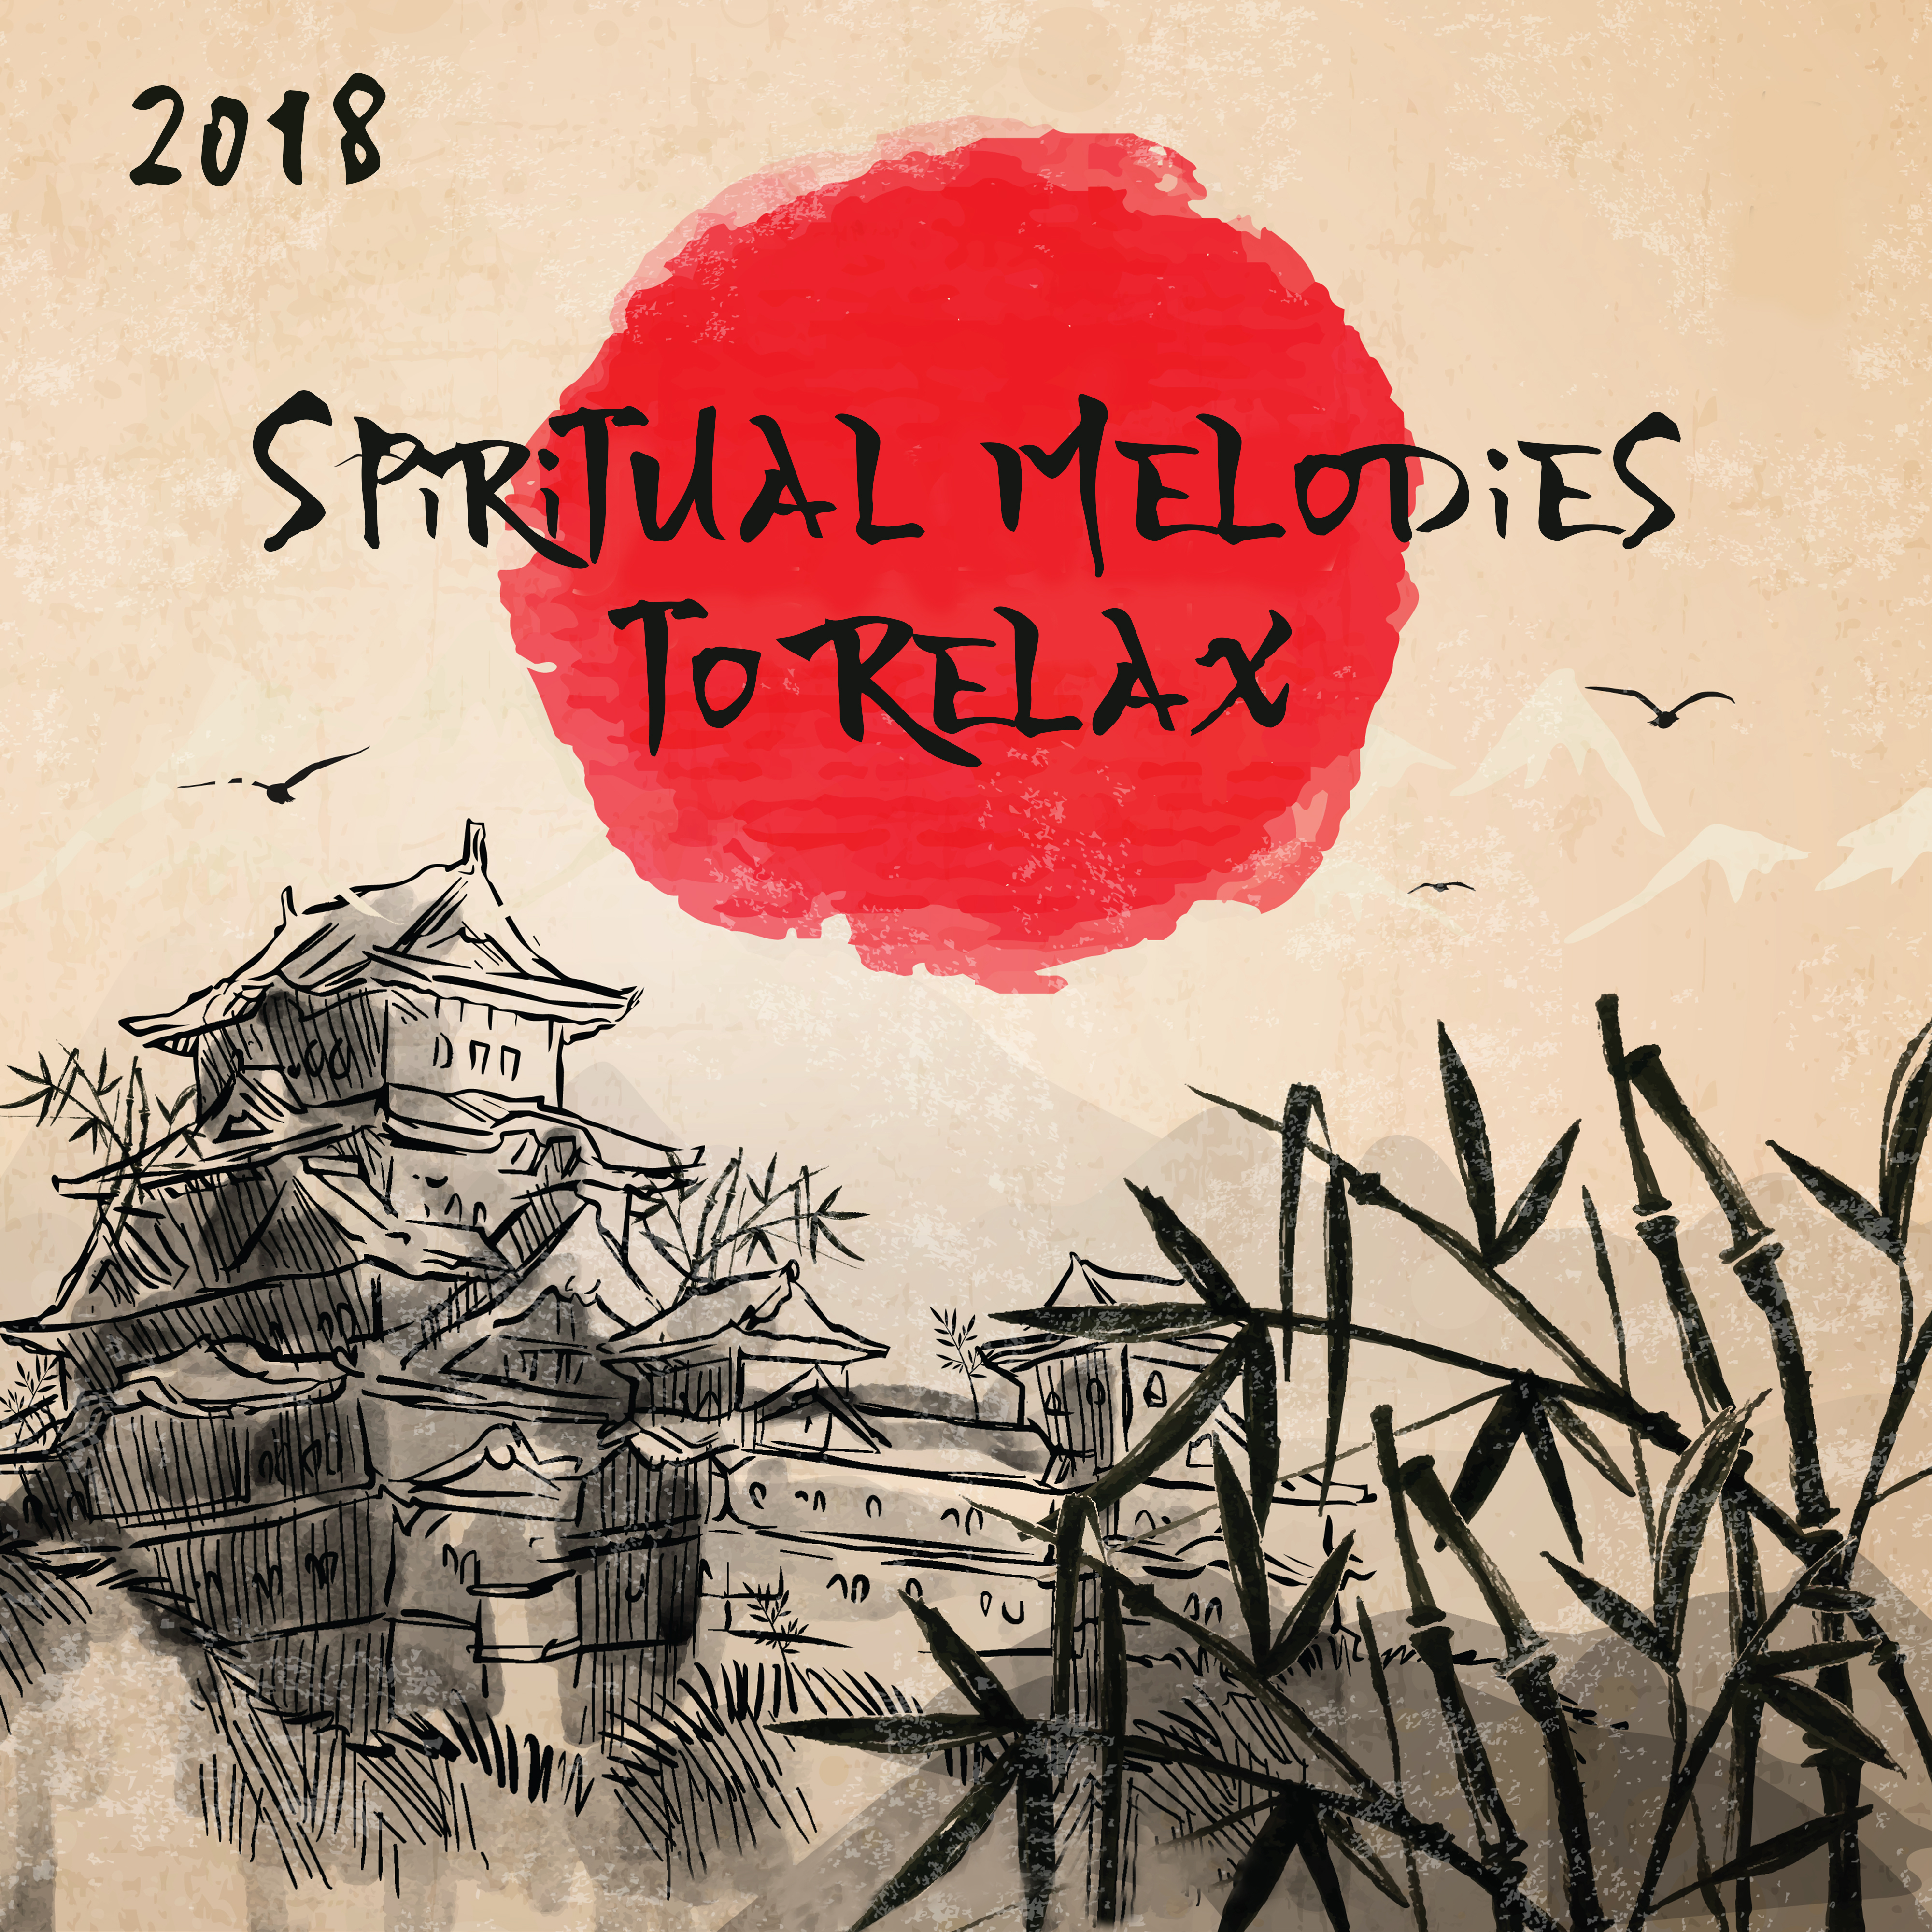 2018 Spiritual Melodies to Relax